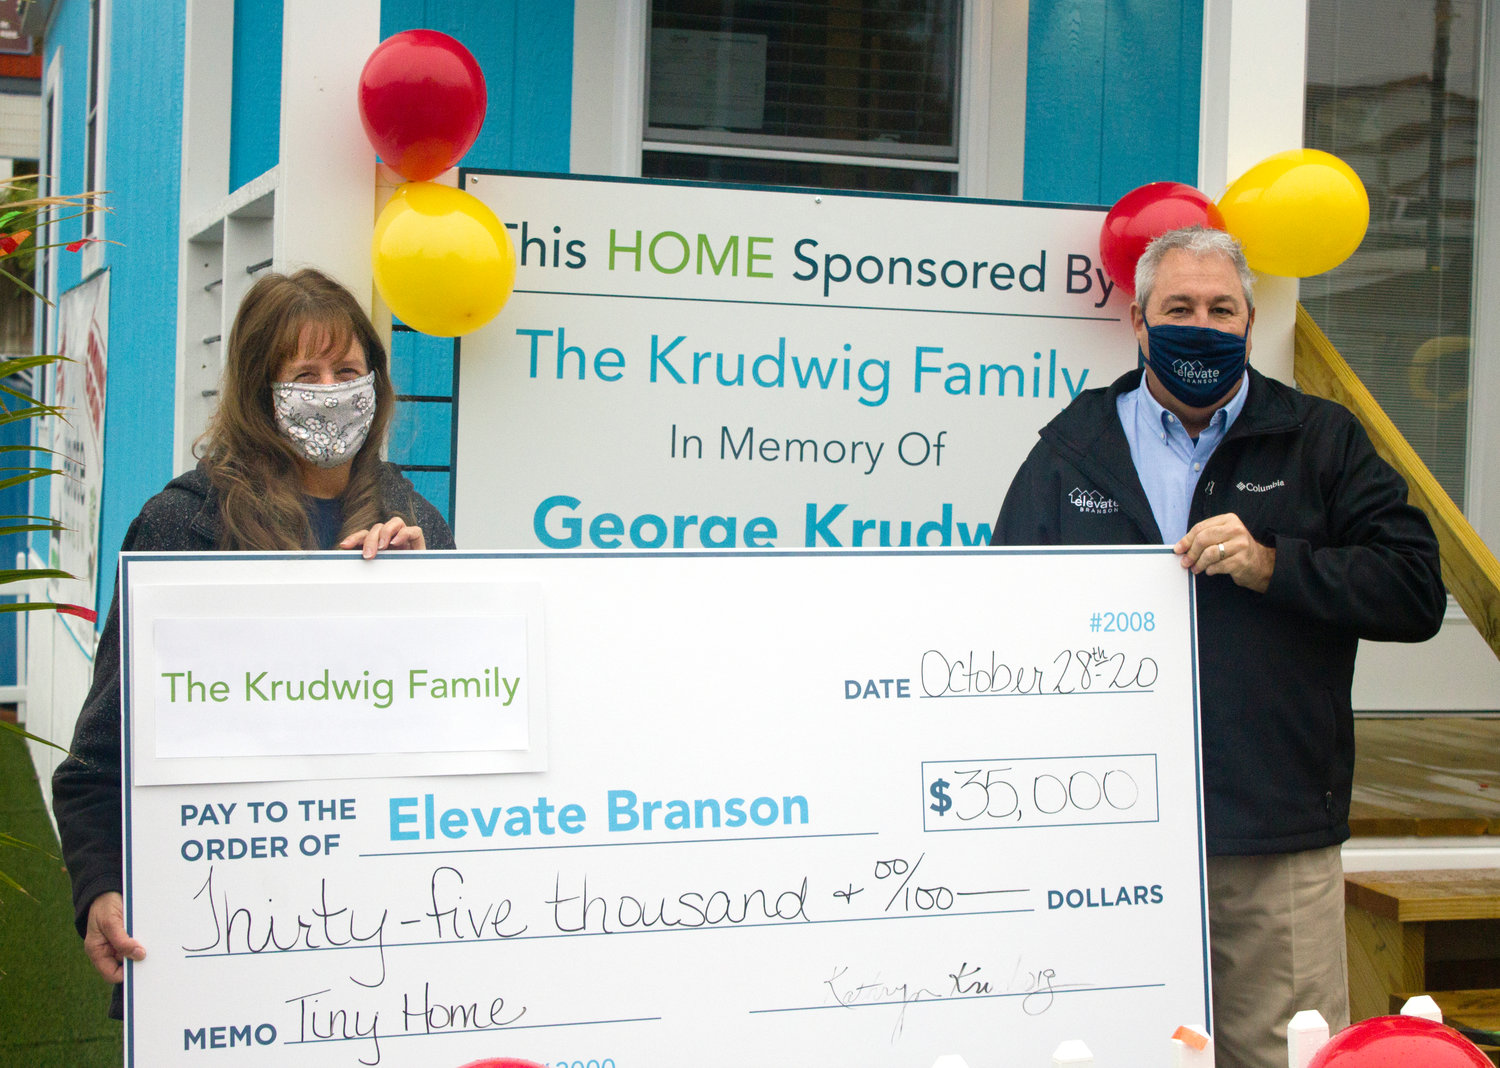 Kathy Krudwig presents a check to Elevate Branson founder Bryan Stallings.